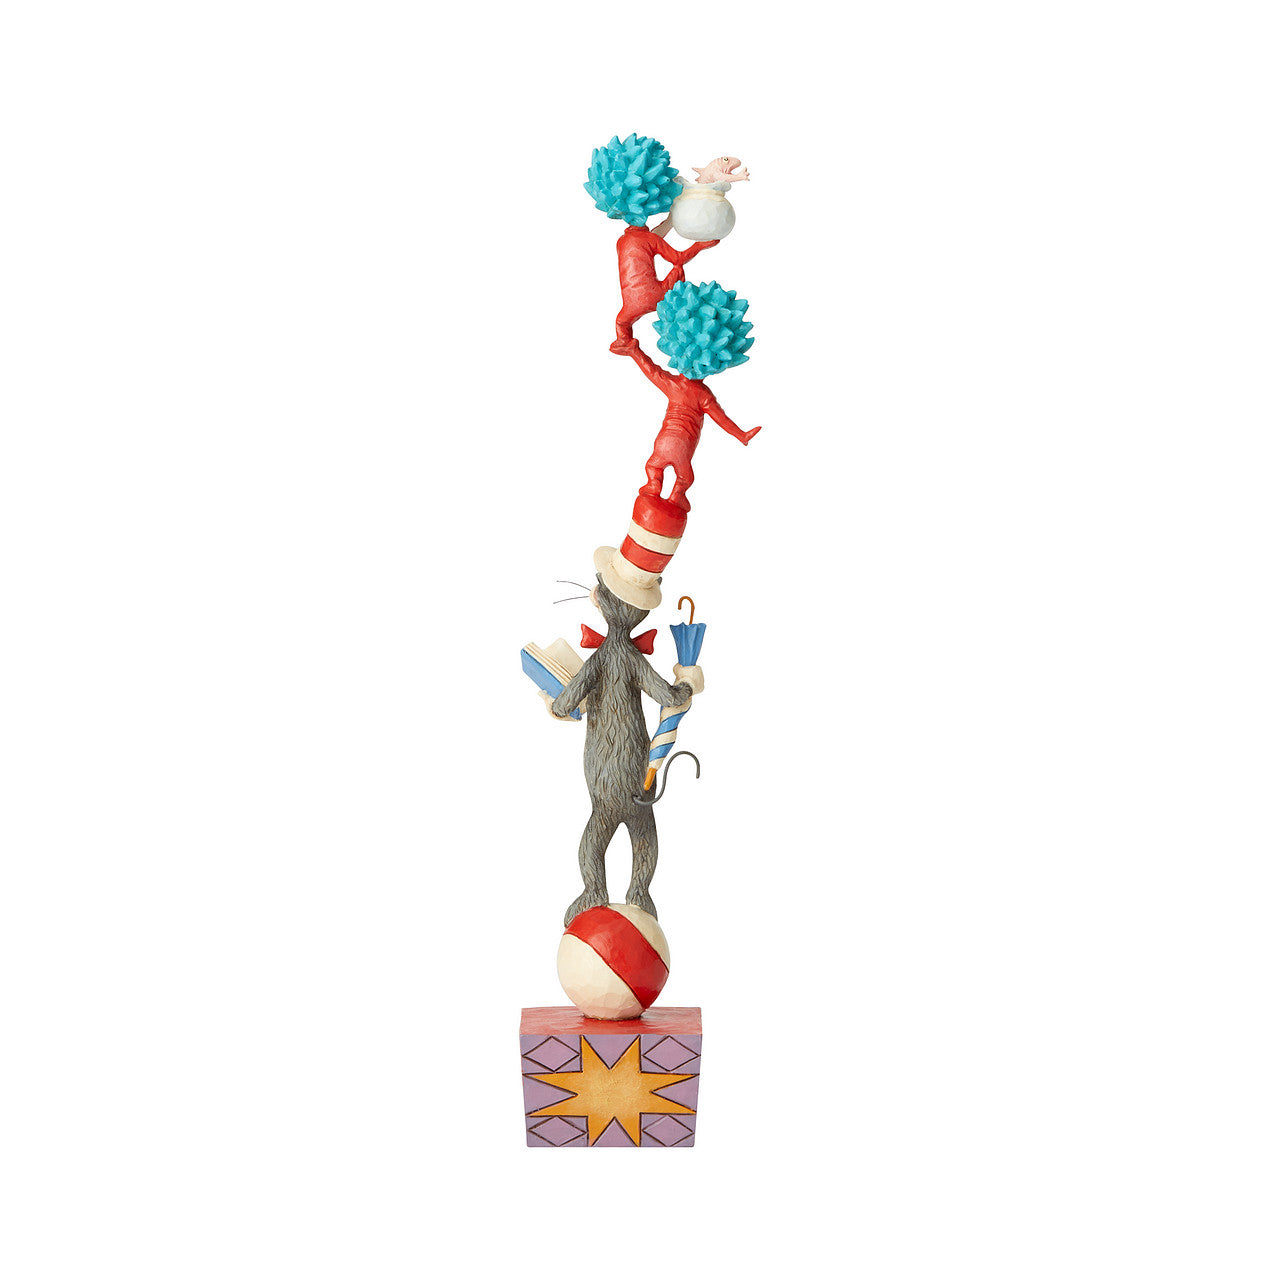 Jim Shore Dr. Seuss The Cat in the Hat and Friends  This Stacked Cat in the Hat features the beloved characters from the iconic children's book perched for destruction. Whimsically decorated with folk-art designs, this precarious totem combines the magic of Dr. Seuss and the artistry of Jim Shore.